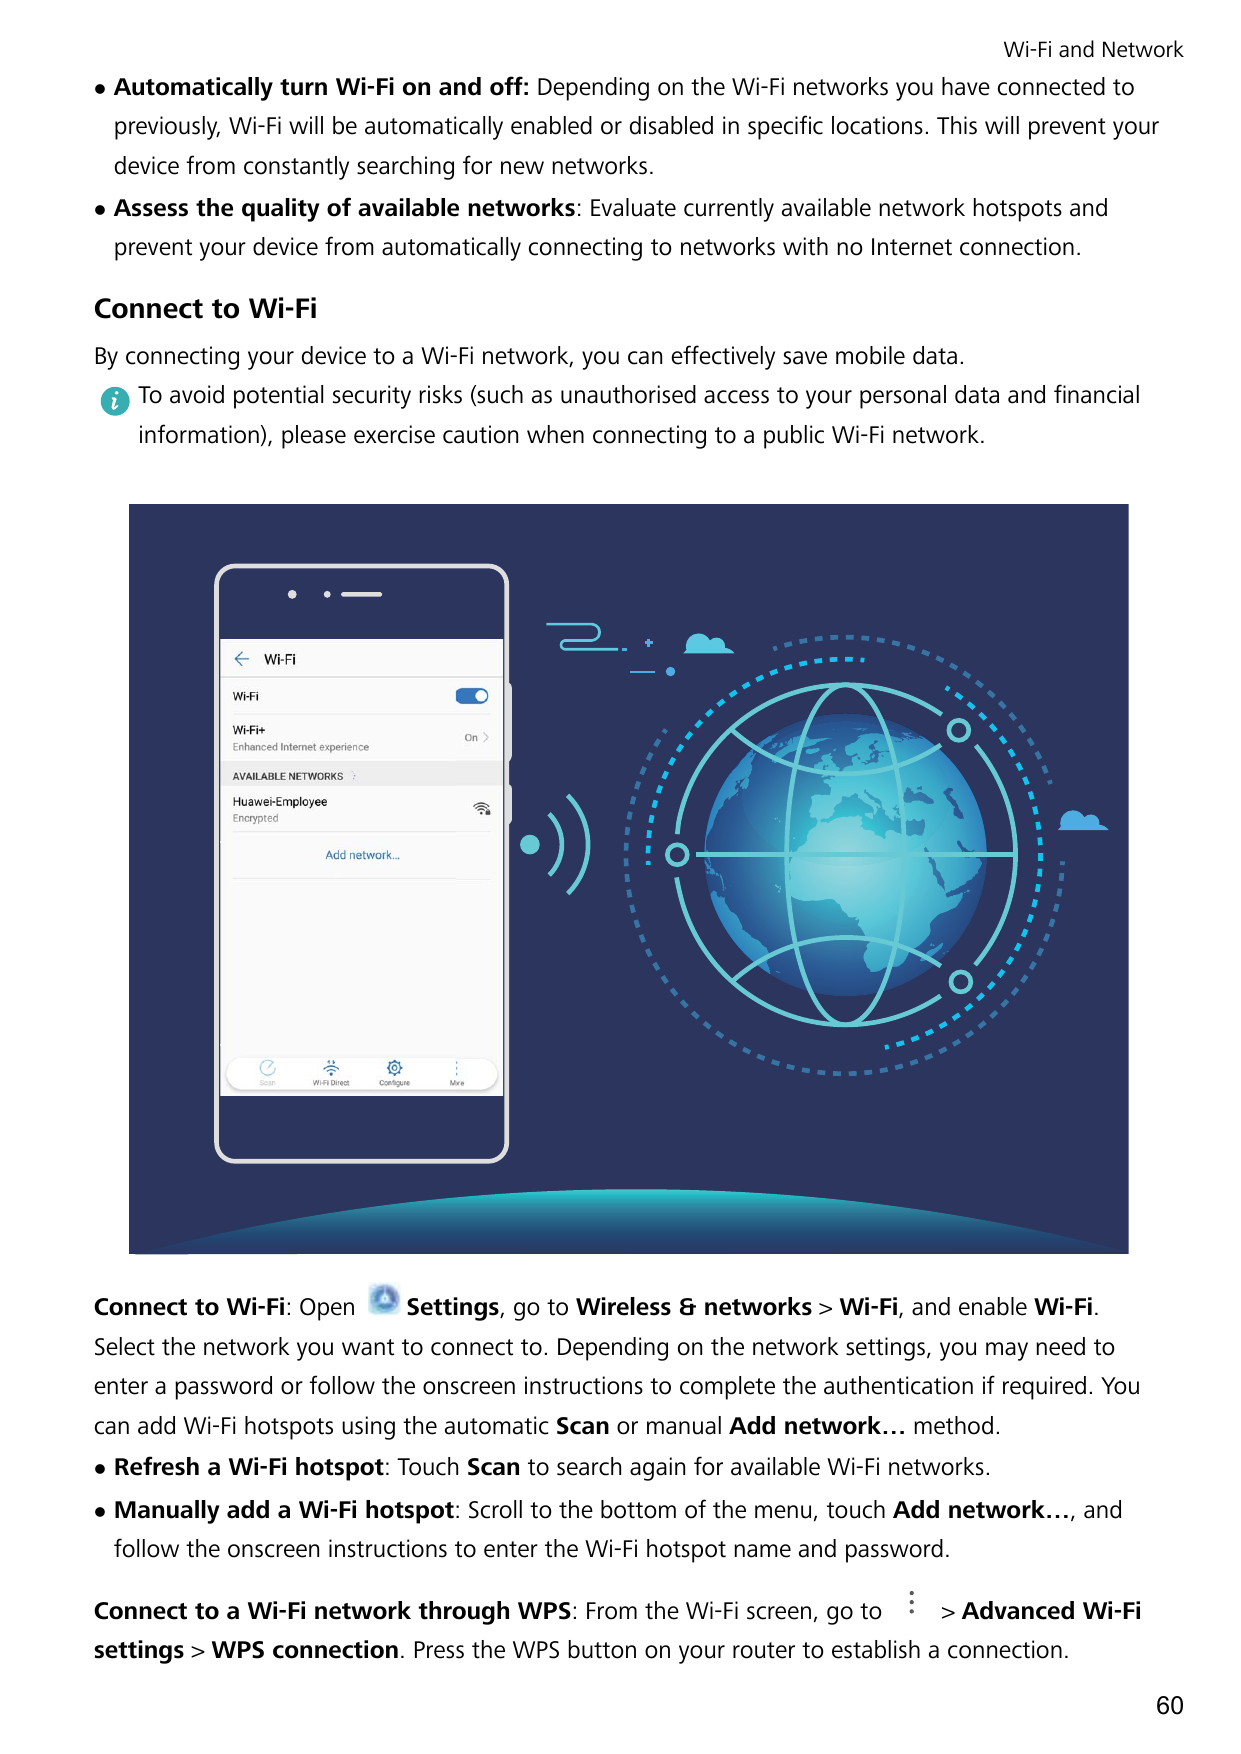 Wi-Fi and NetworklAutomatically turn Wi-Fi on and off: Depending on the Wi-Fi networks you have connected topreviously, Wi-Fi wi